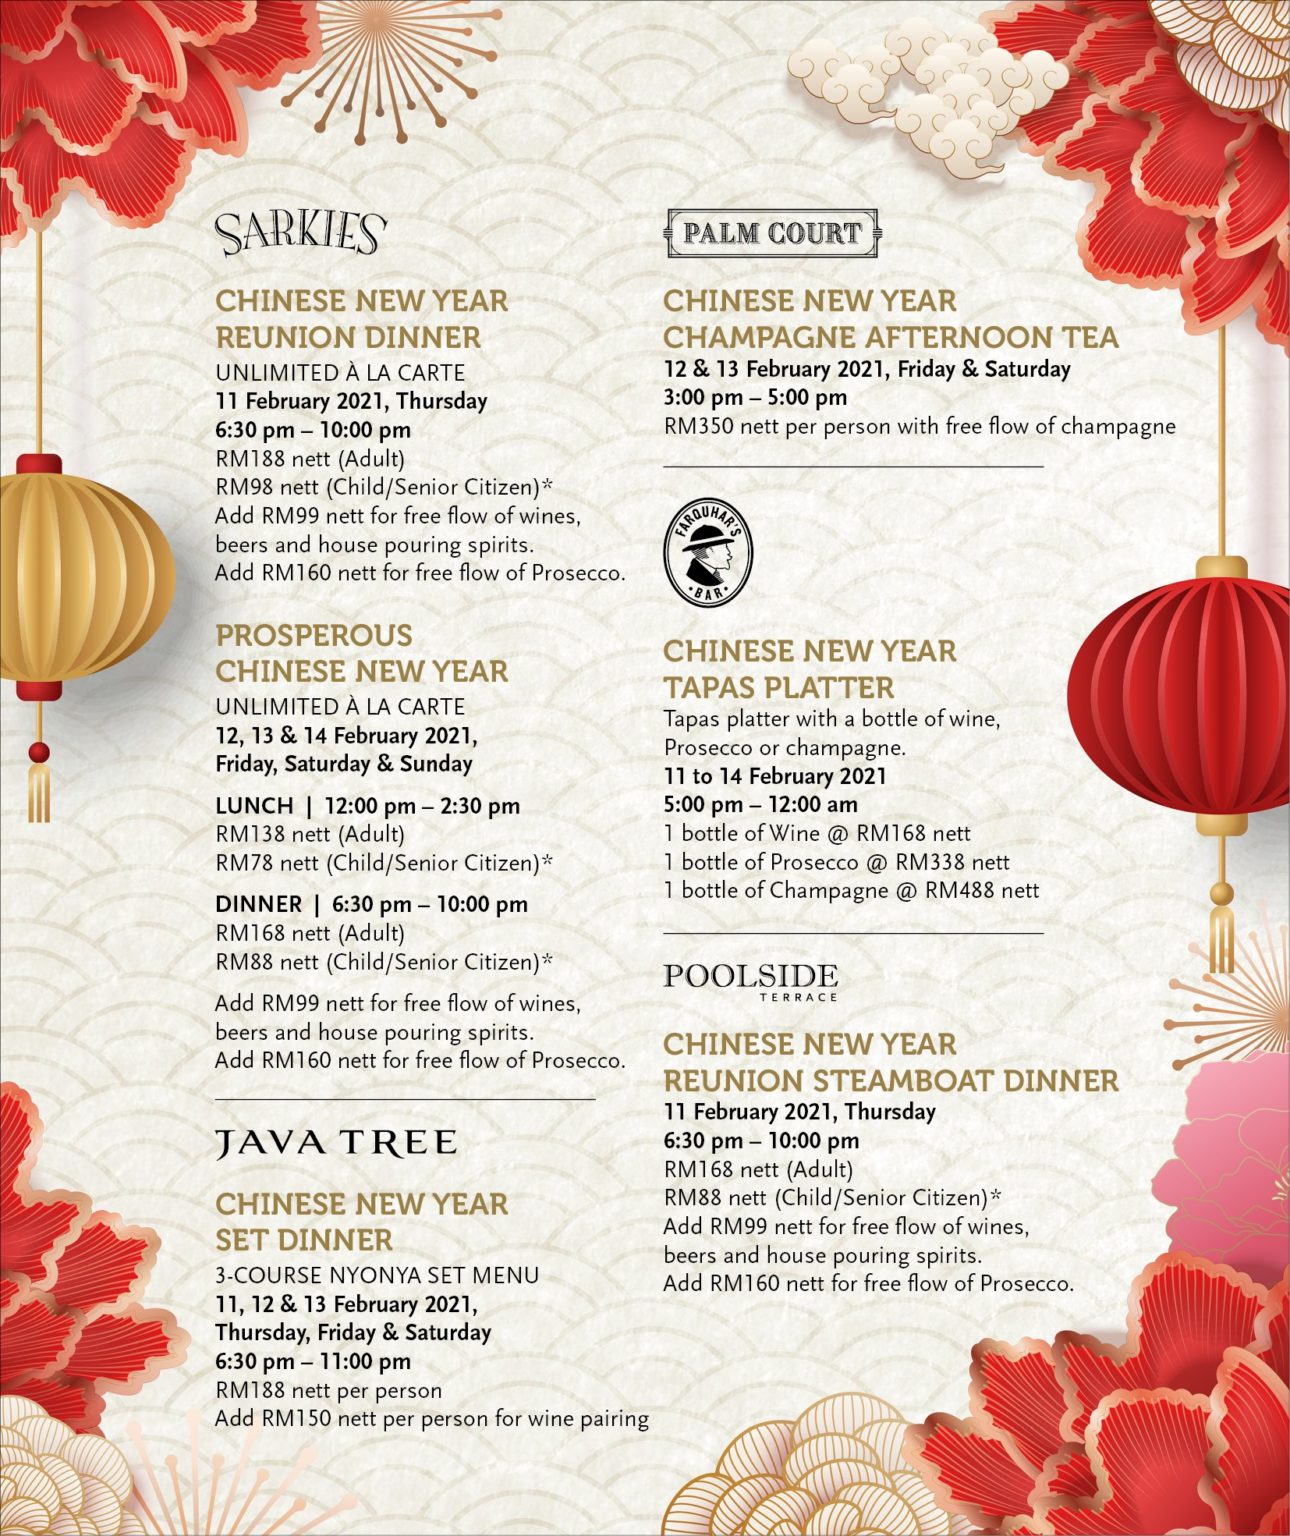 Places to Celebrate CNY Reunion Dinner in Penang | The Penangite